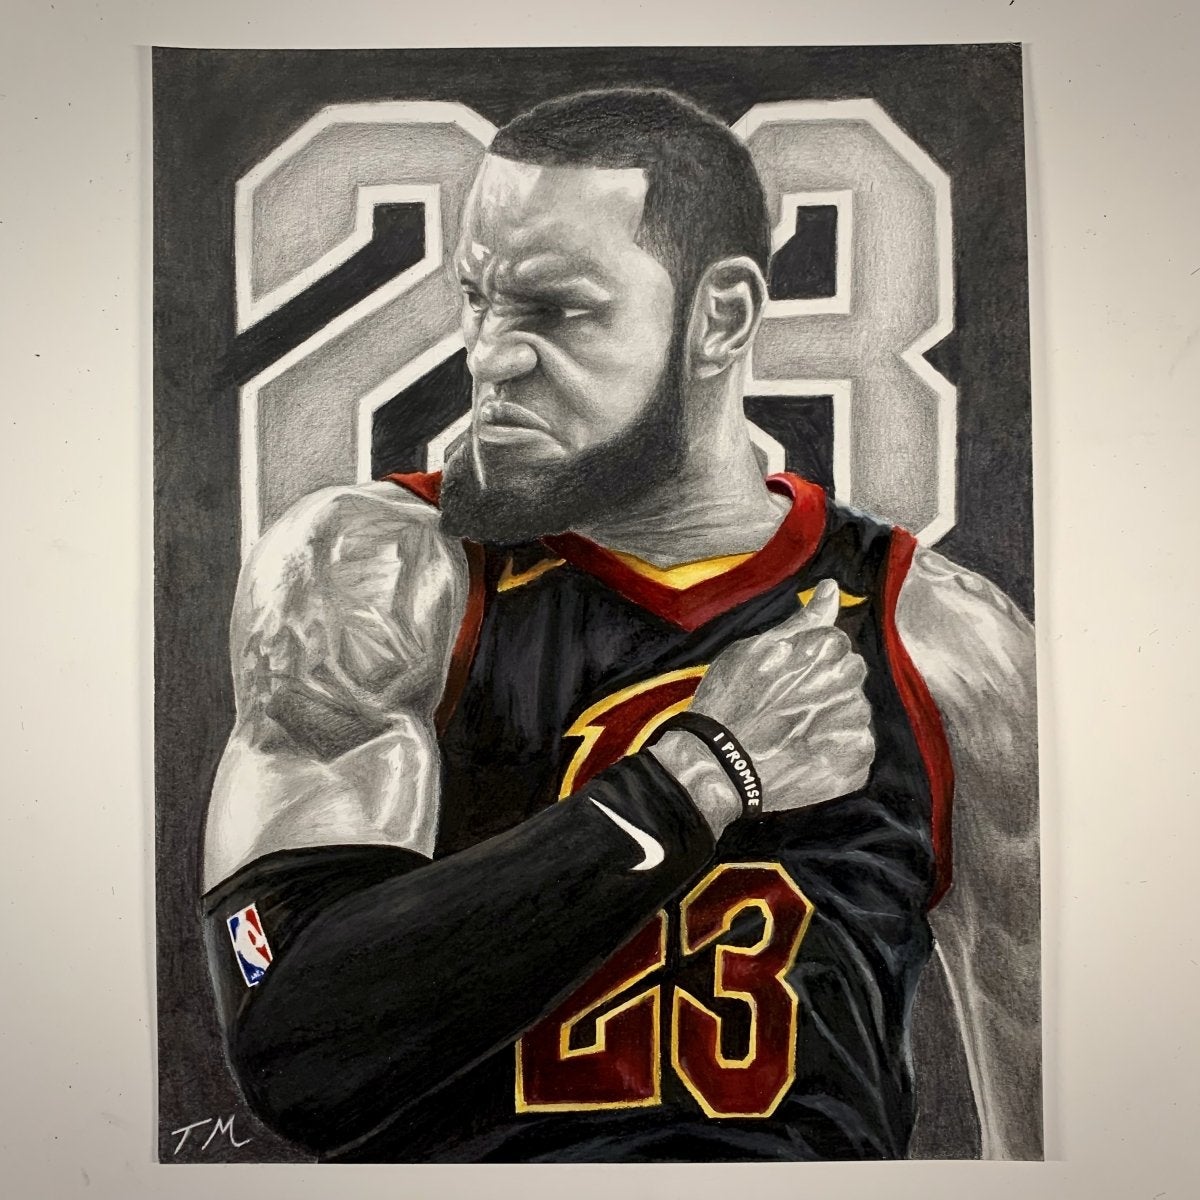 lebron james drawing pages